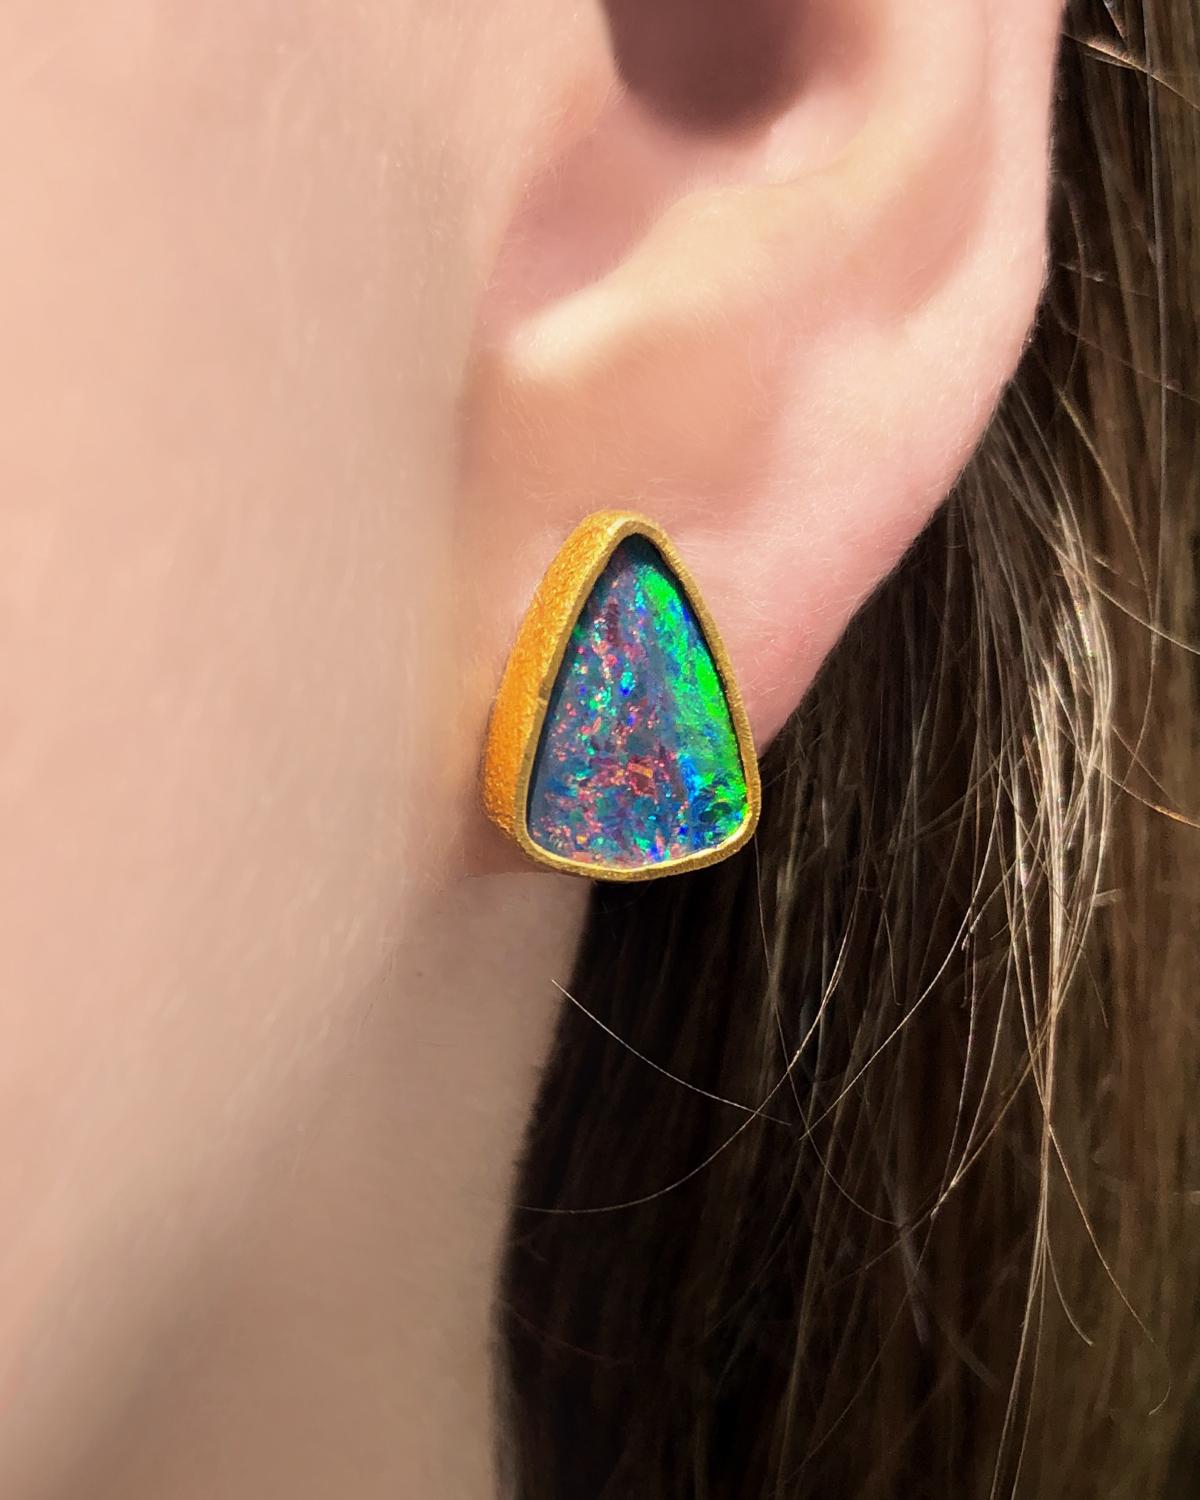 One of a Kind Stud Earrings handcrafted by acclaimed jewelry designer Devta Doolan, with violet blue opal doublets exhibiting a vibrant multicolored confetti flash with electrifying green, orange, blue, yellow, violet, and purple fire. The opals are